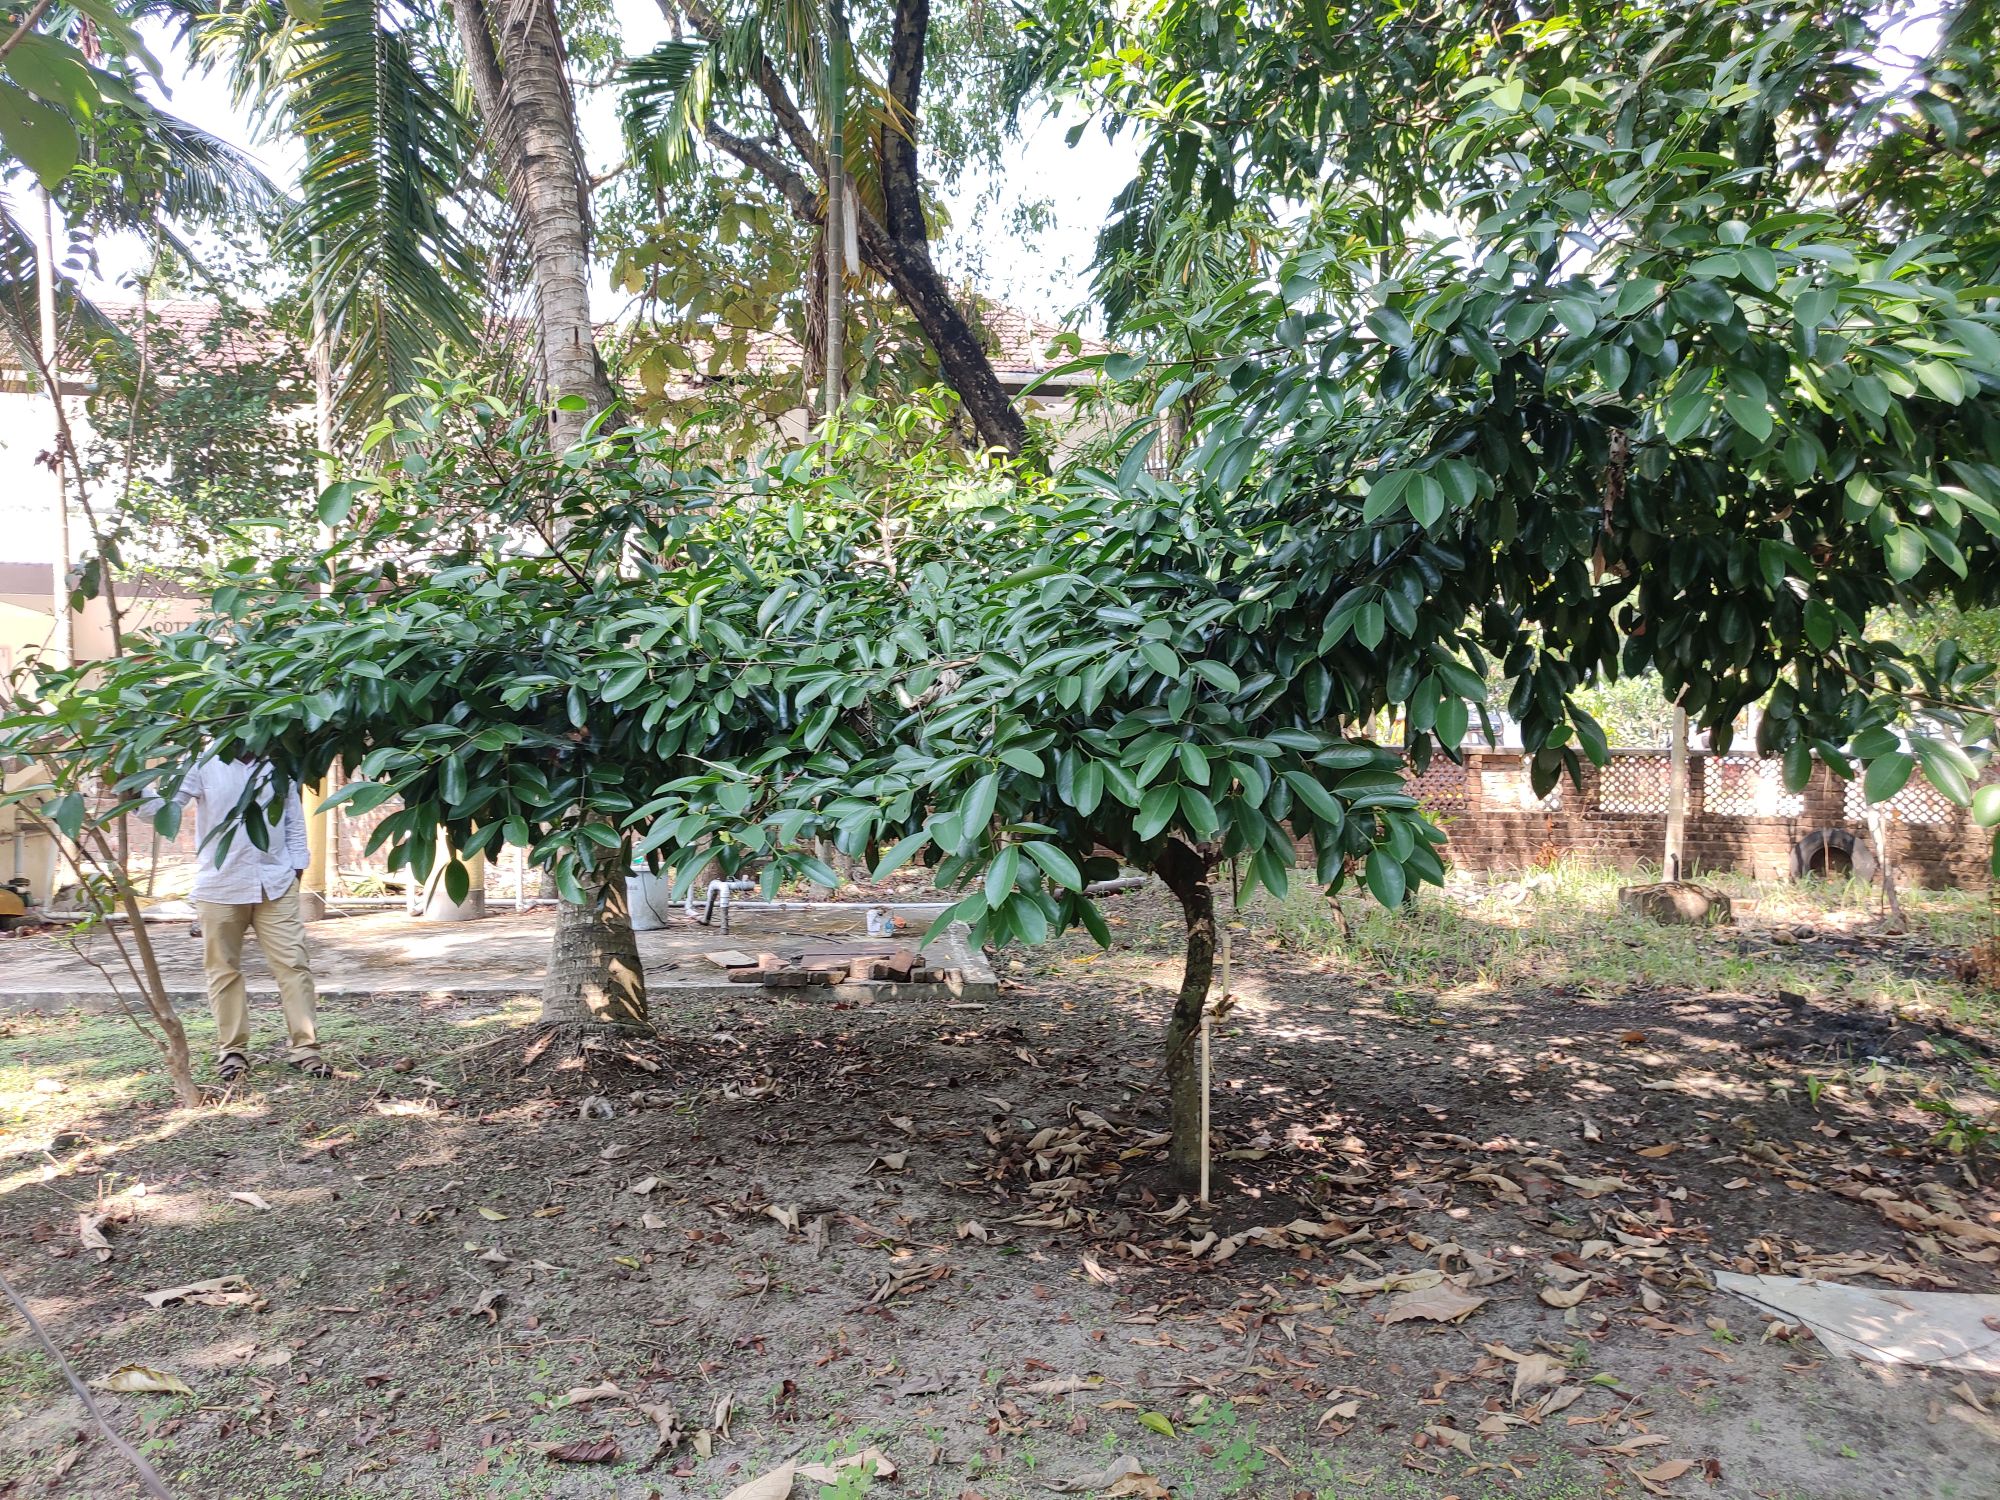 Tamarind trees are observed to have flourished in this region after the installation of the Rainwater Syringe unit. (Image by authors)